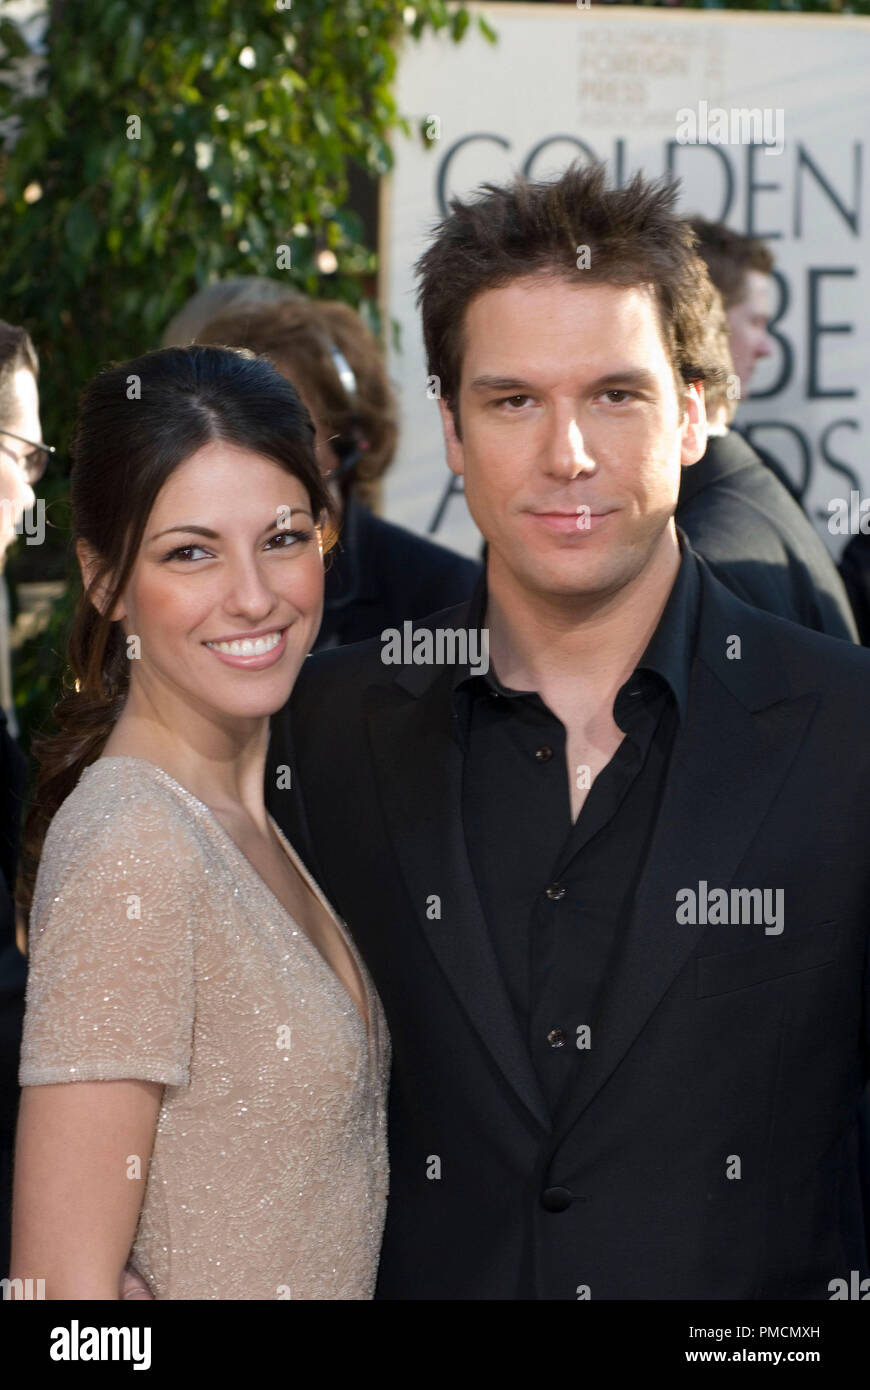 Hollywood Foreign Press Association presents the 2007 'Golden Globe Awards - 64th Annual' (Arrivals) Dane Cook 1-15-07 Stock Photo